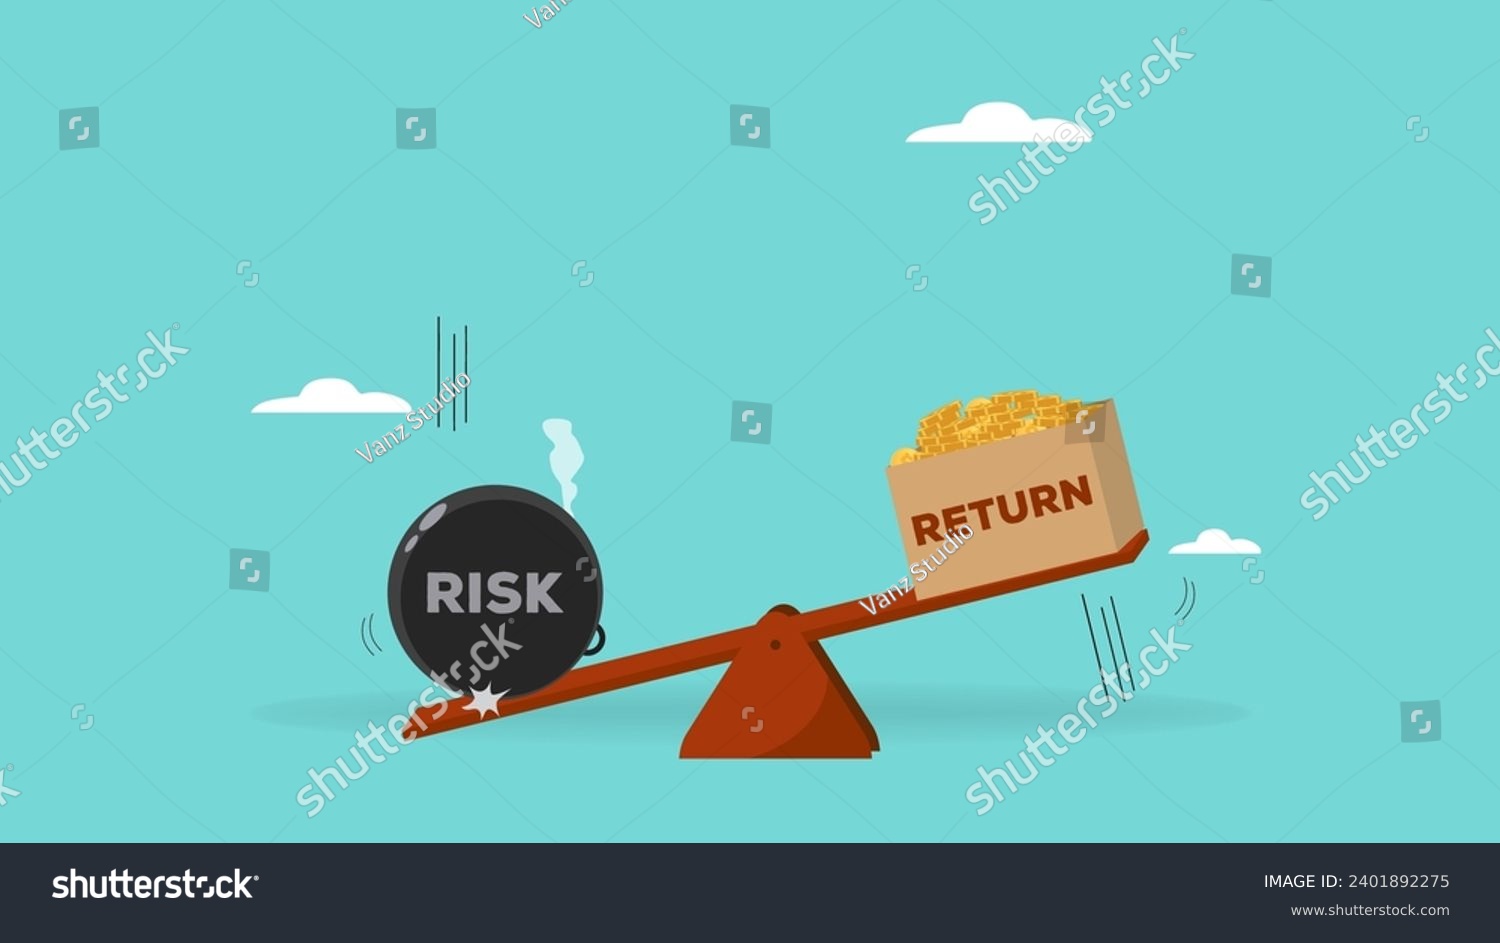 SVG of high risk high return business investment concept illustration, investor risk appetite in securities and investment asset to get high reward, The weight on seesaw creates a box of dollar prize money svg